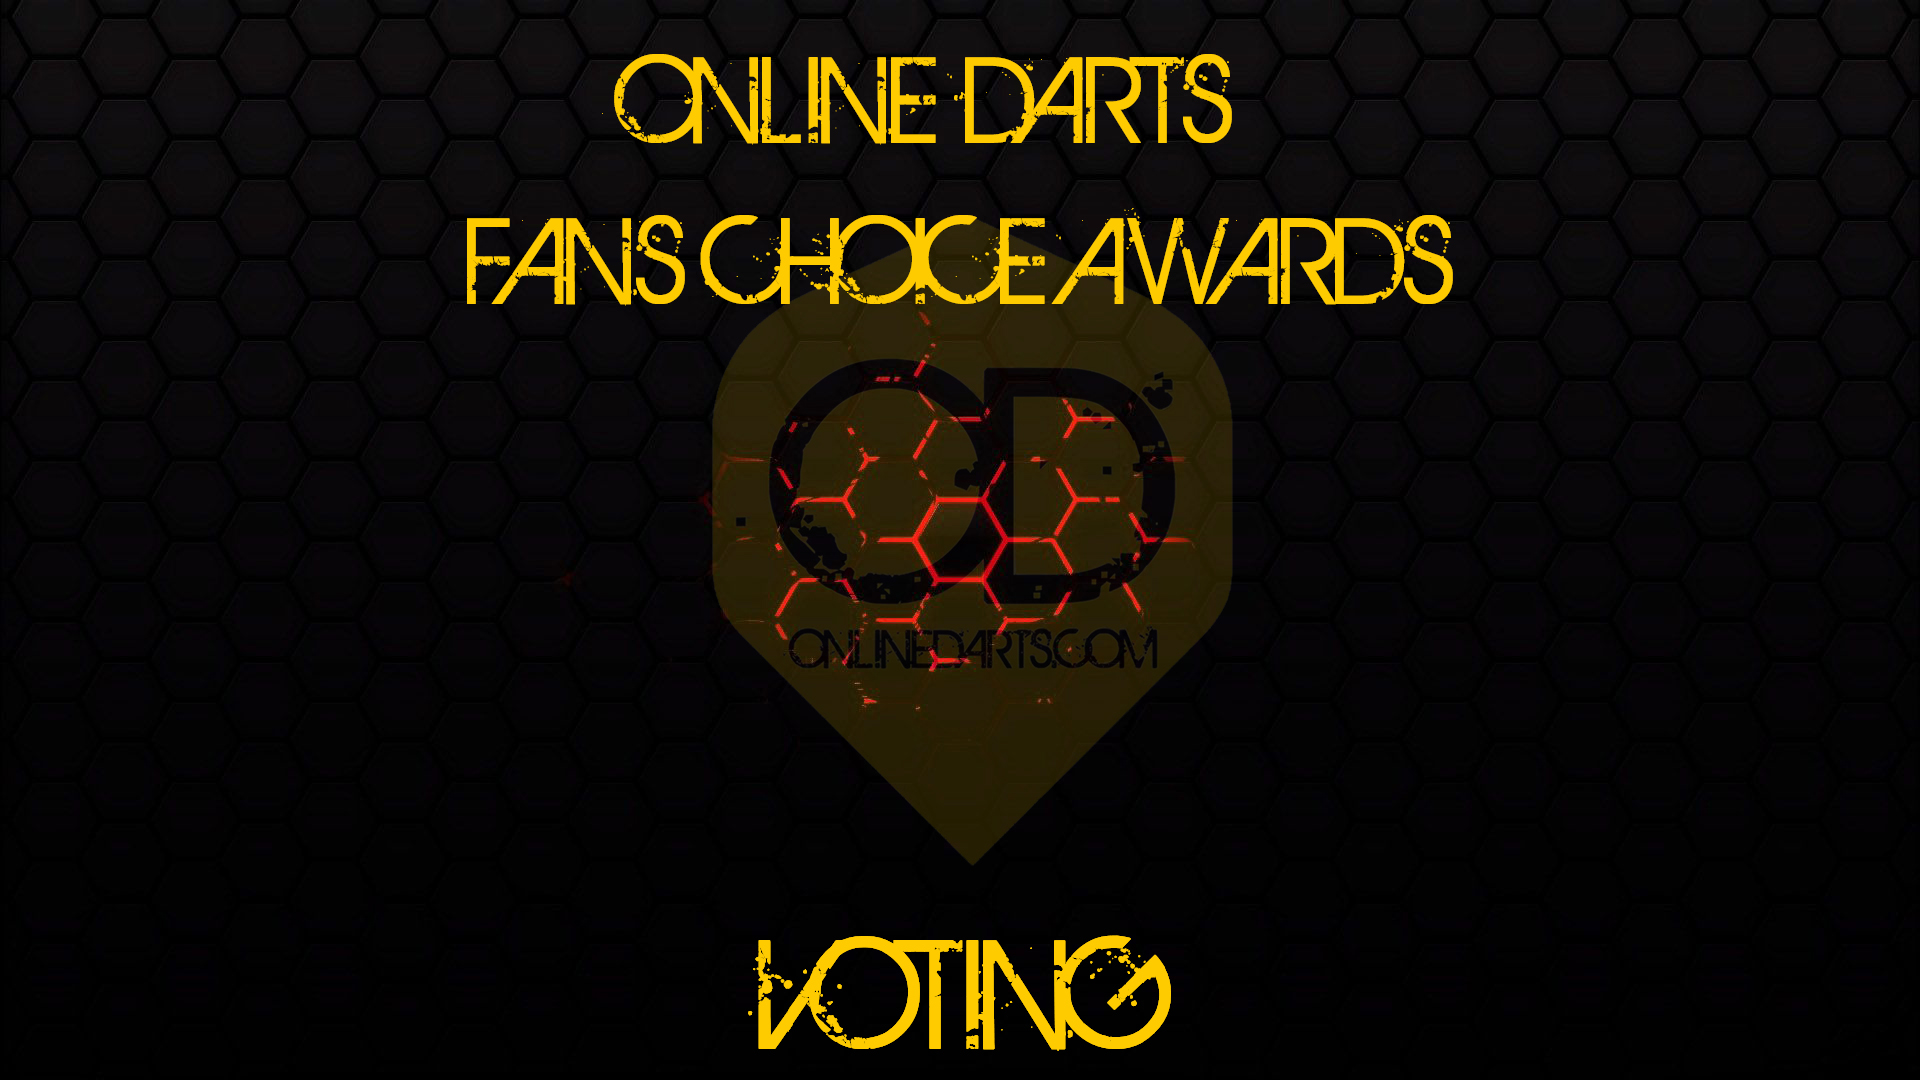 The Online Darts Fans Choice Awards